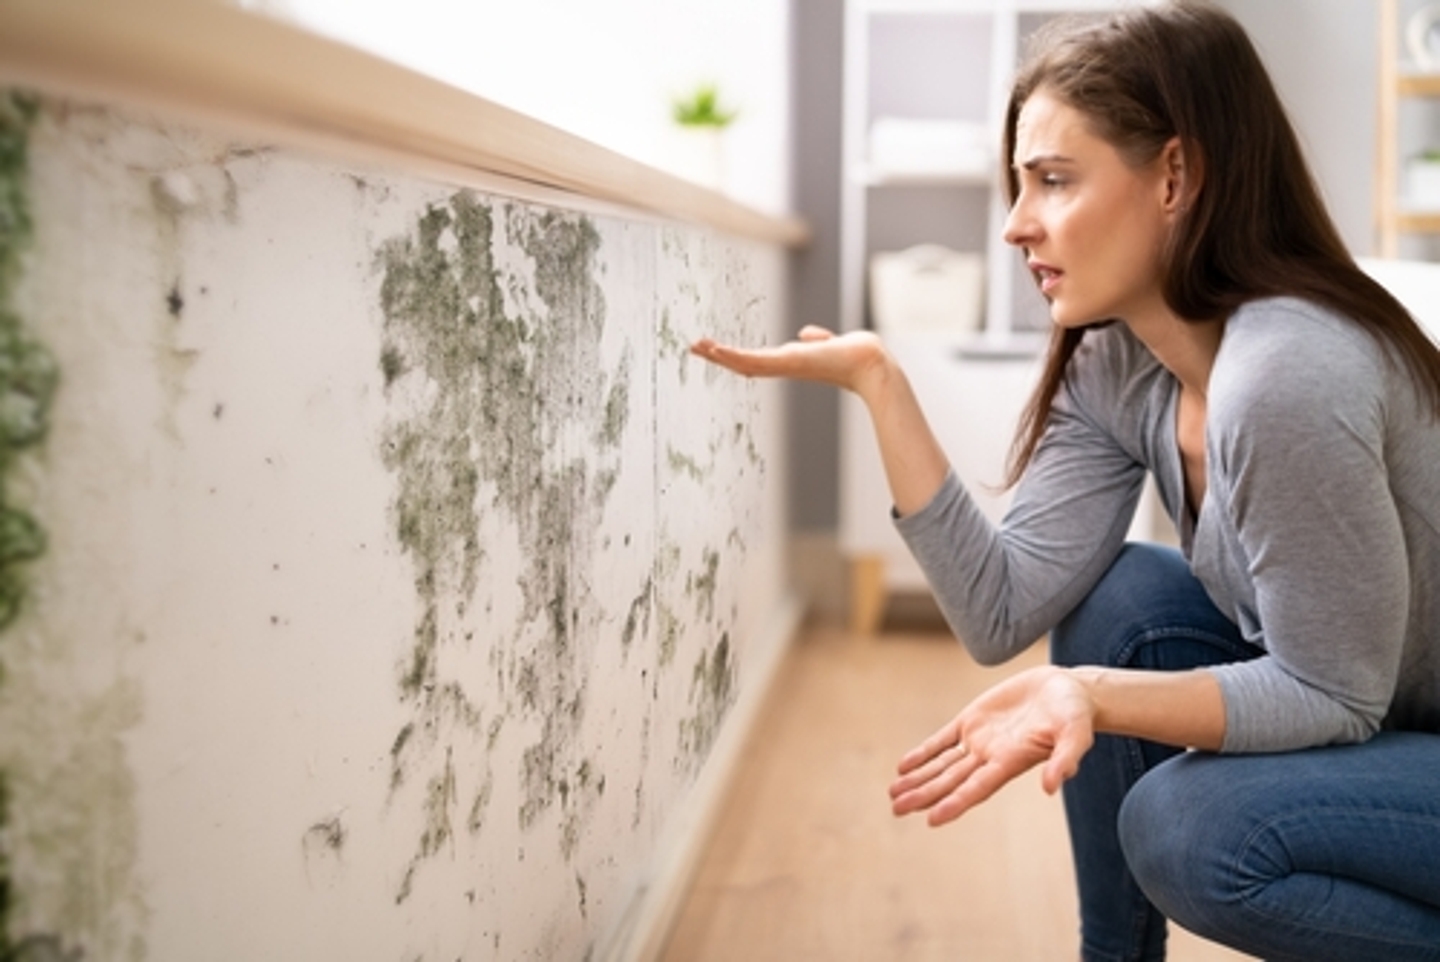 Woman with dark hair, in a gray shirt and jeans, looking at mold on a wall